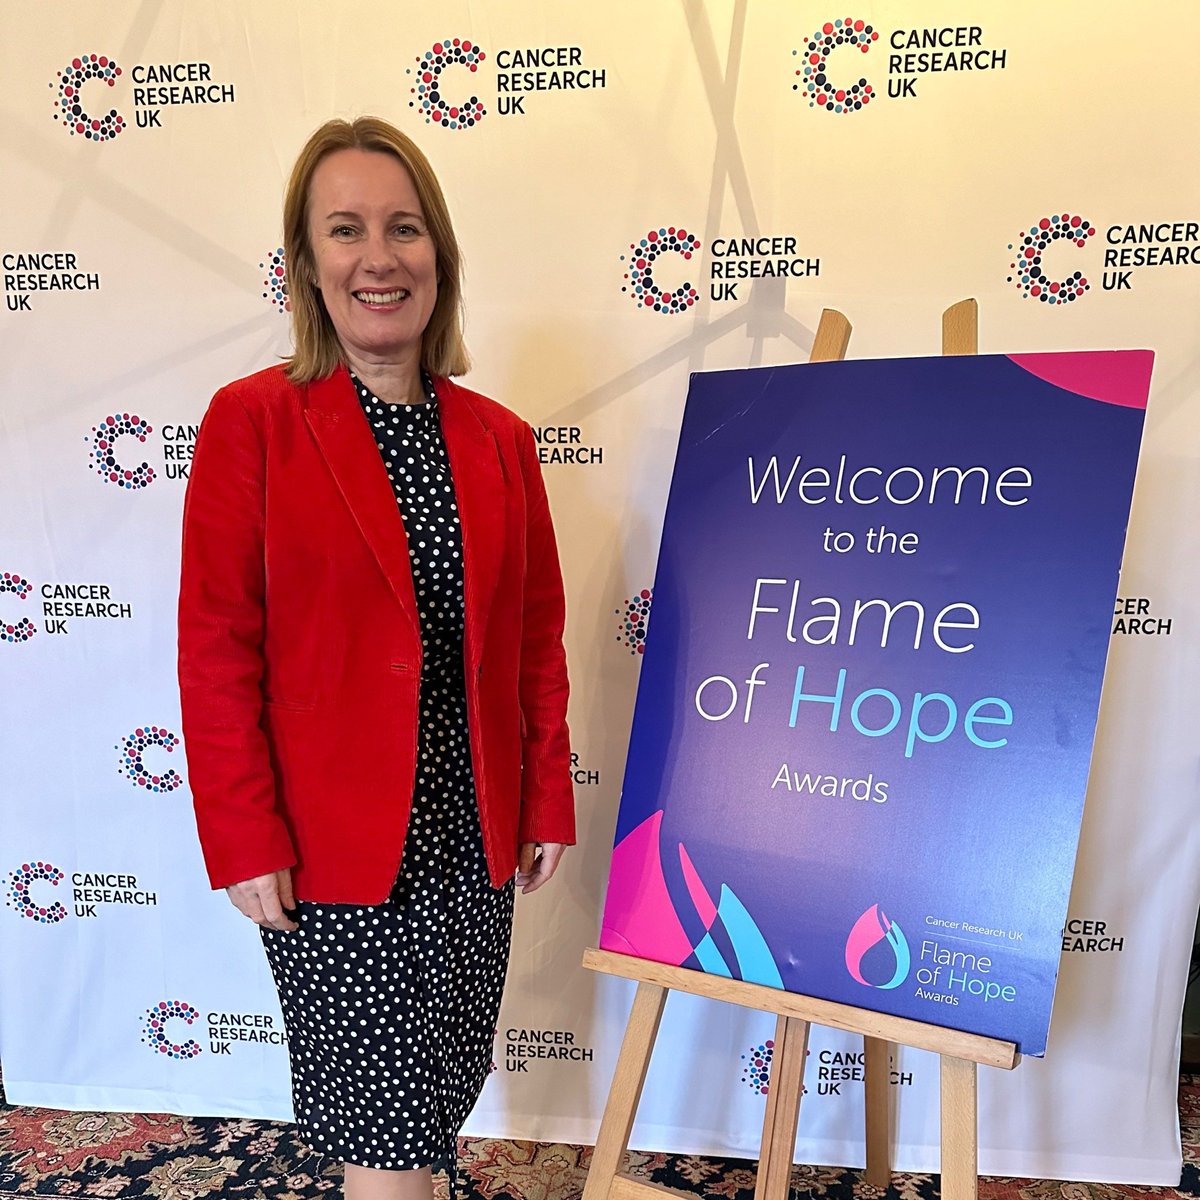 I love this time of year when our @CR_UK Flame of Hope Awards roll round. Fantastic to celebrate our outstanding volunteers, who give their time and energy to help beat cancer. Congratulations to all winners - thank you for having me at the Maidstone event today!